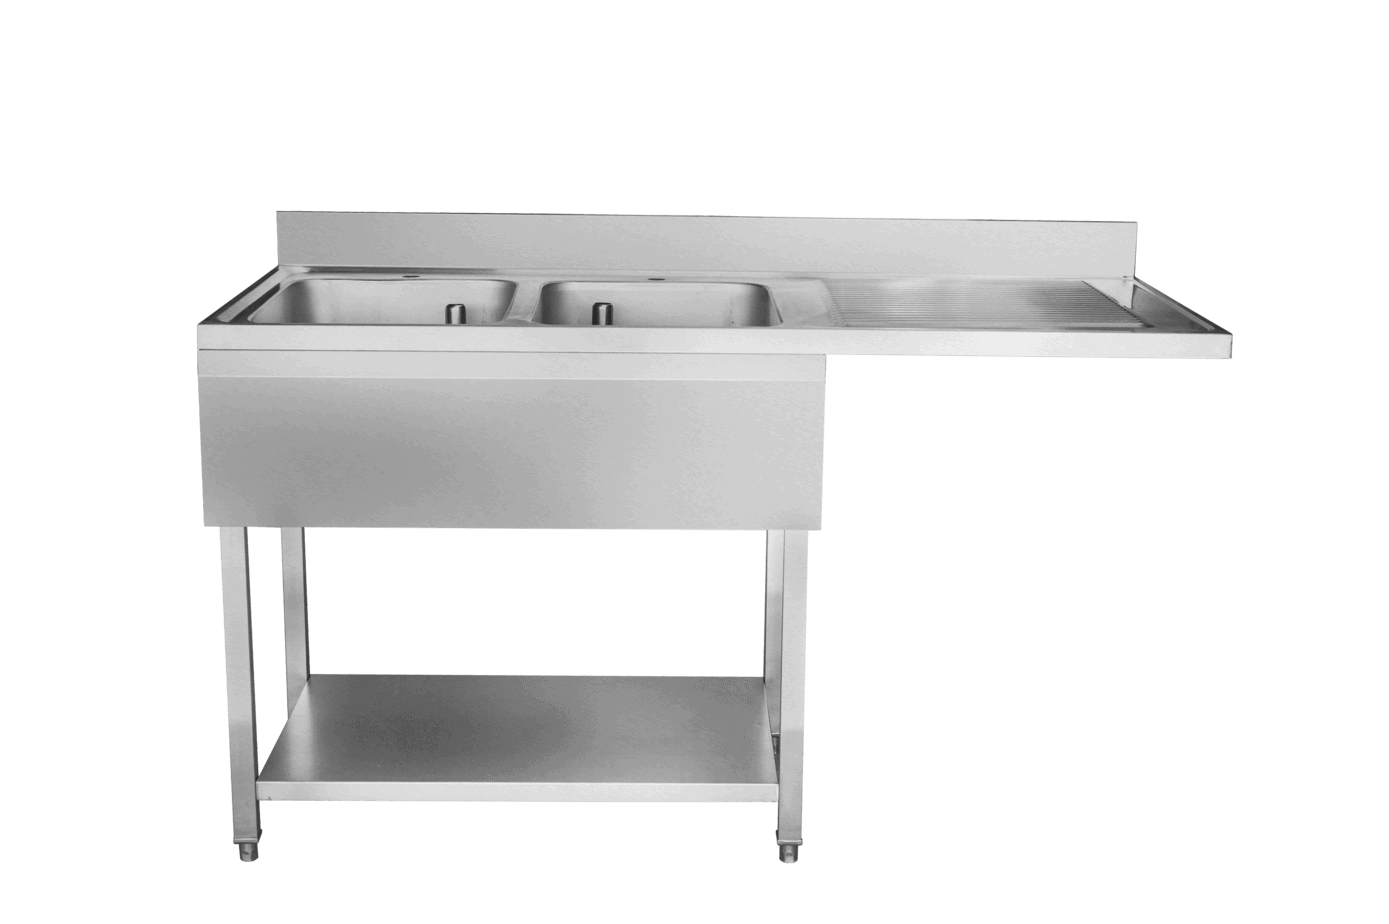 Double Bowl Commercial Dishwasher Sink - commercial catering sinks